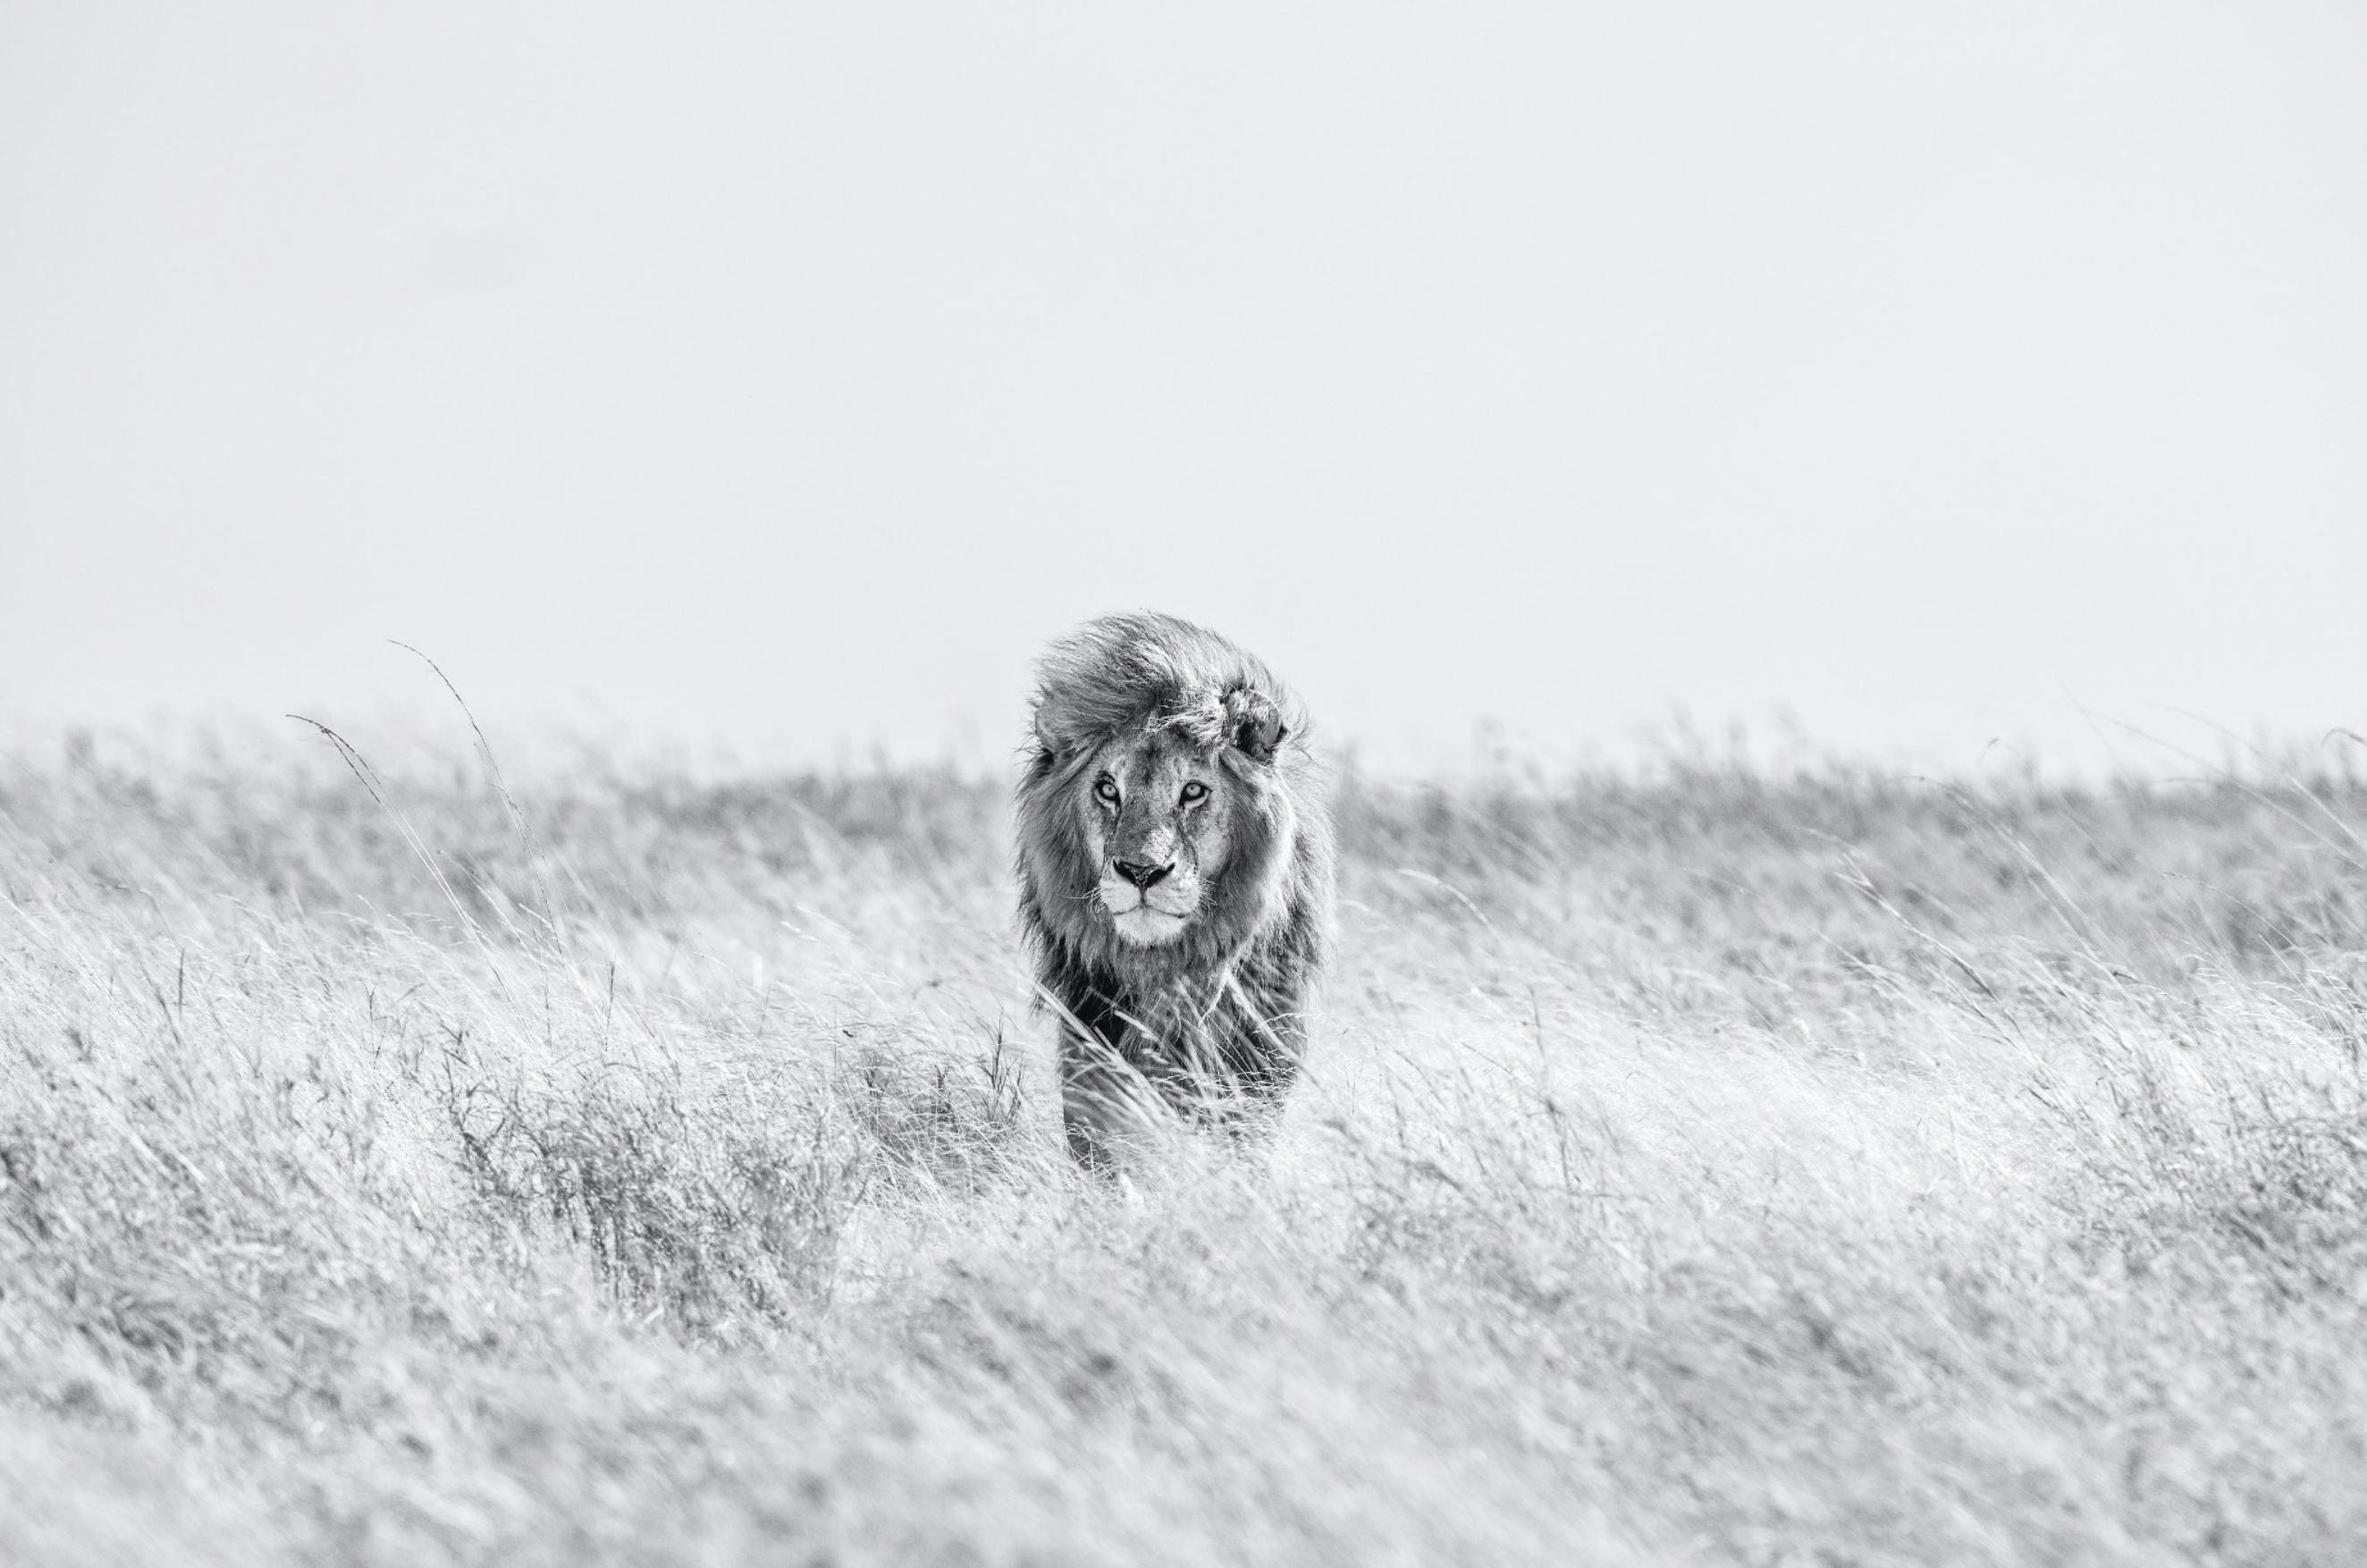 Black and White Photograph David Yarrow - Fields d'or